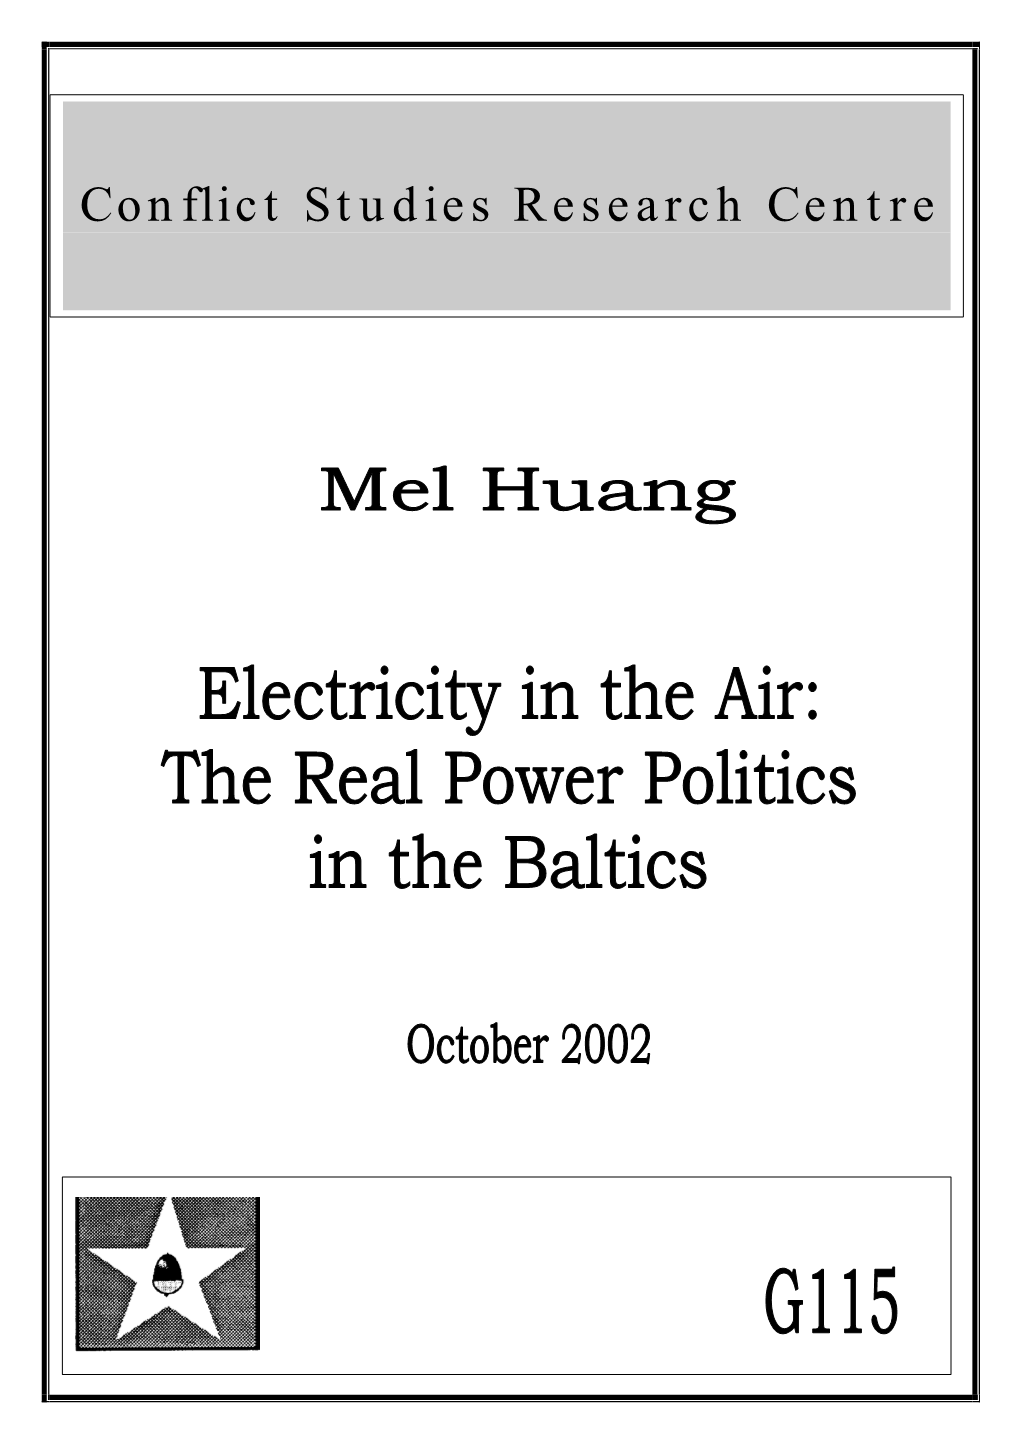 Electricity in the Air: the Real Power Politics in the Baltics